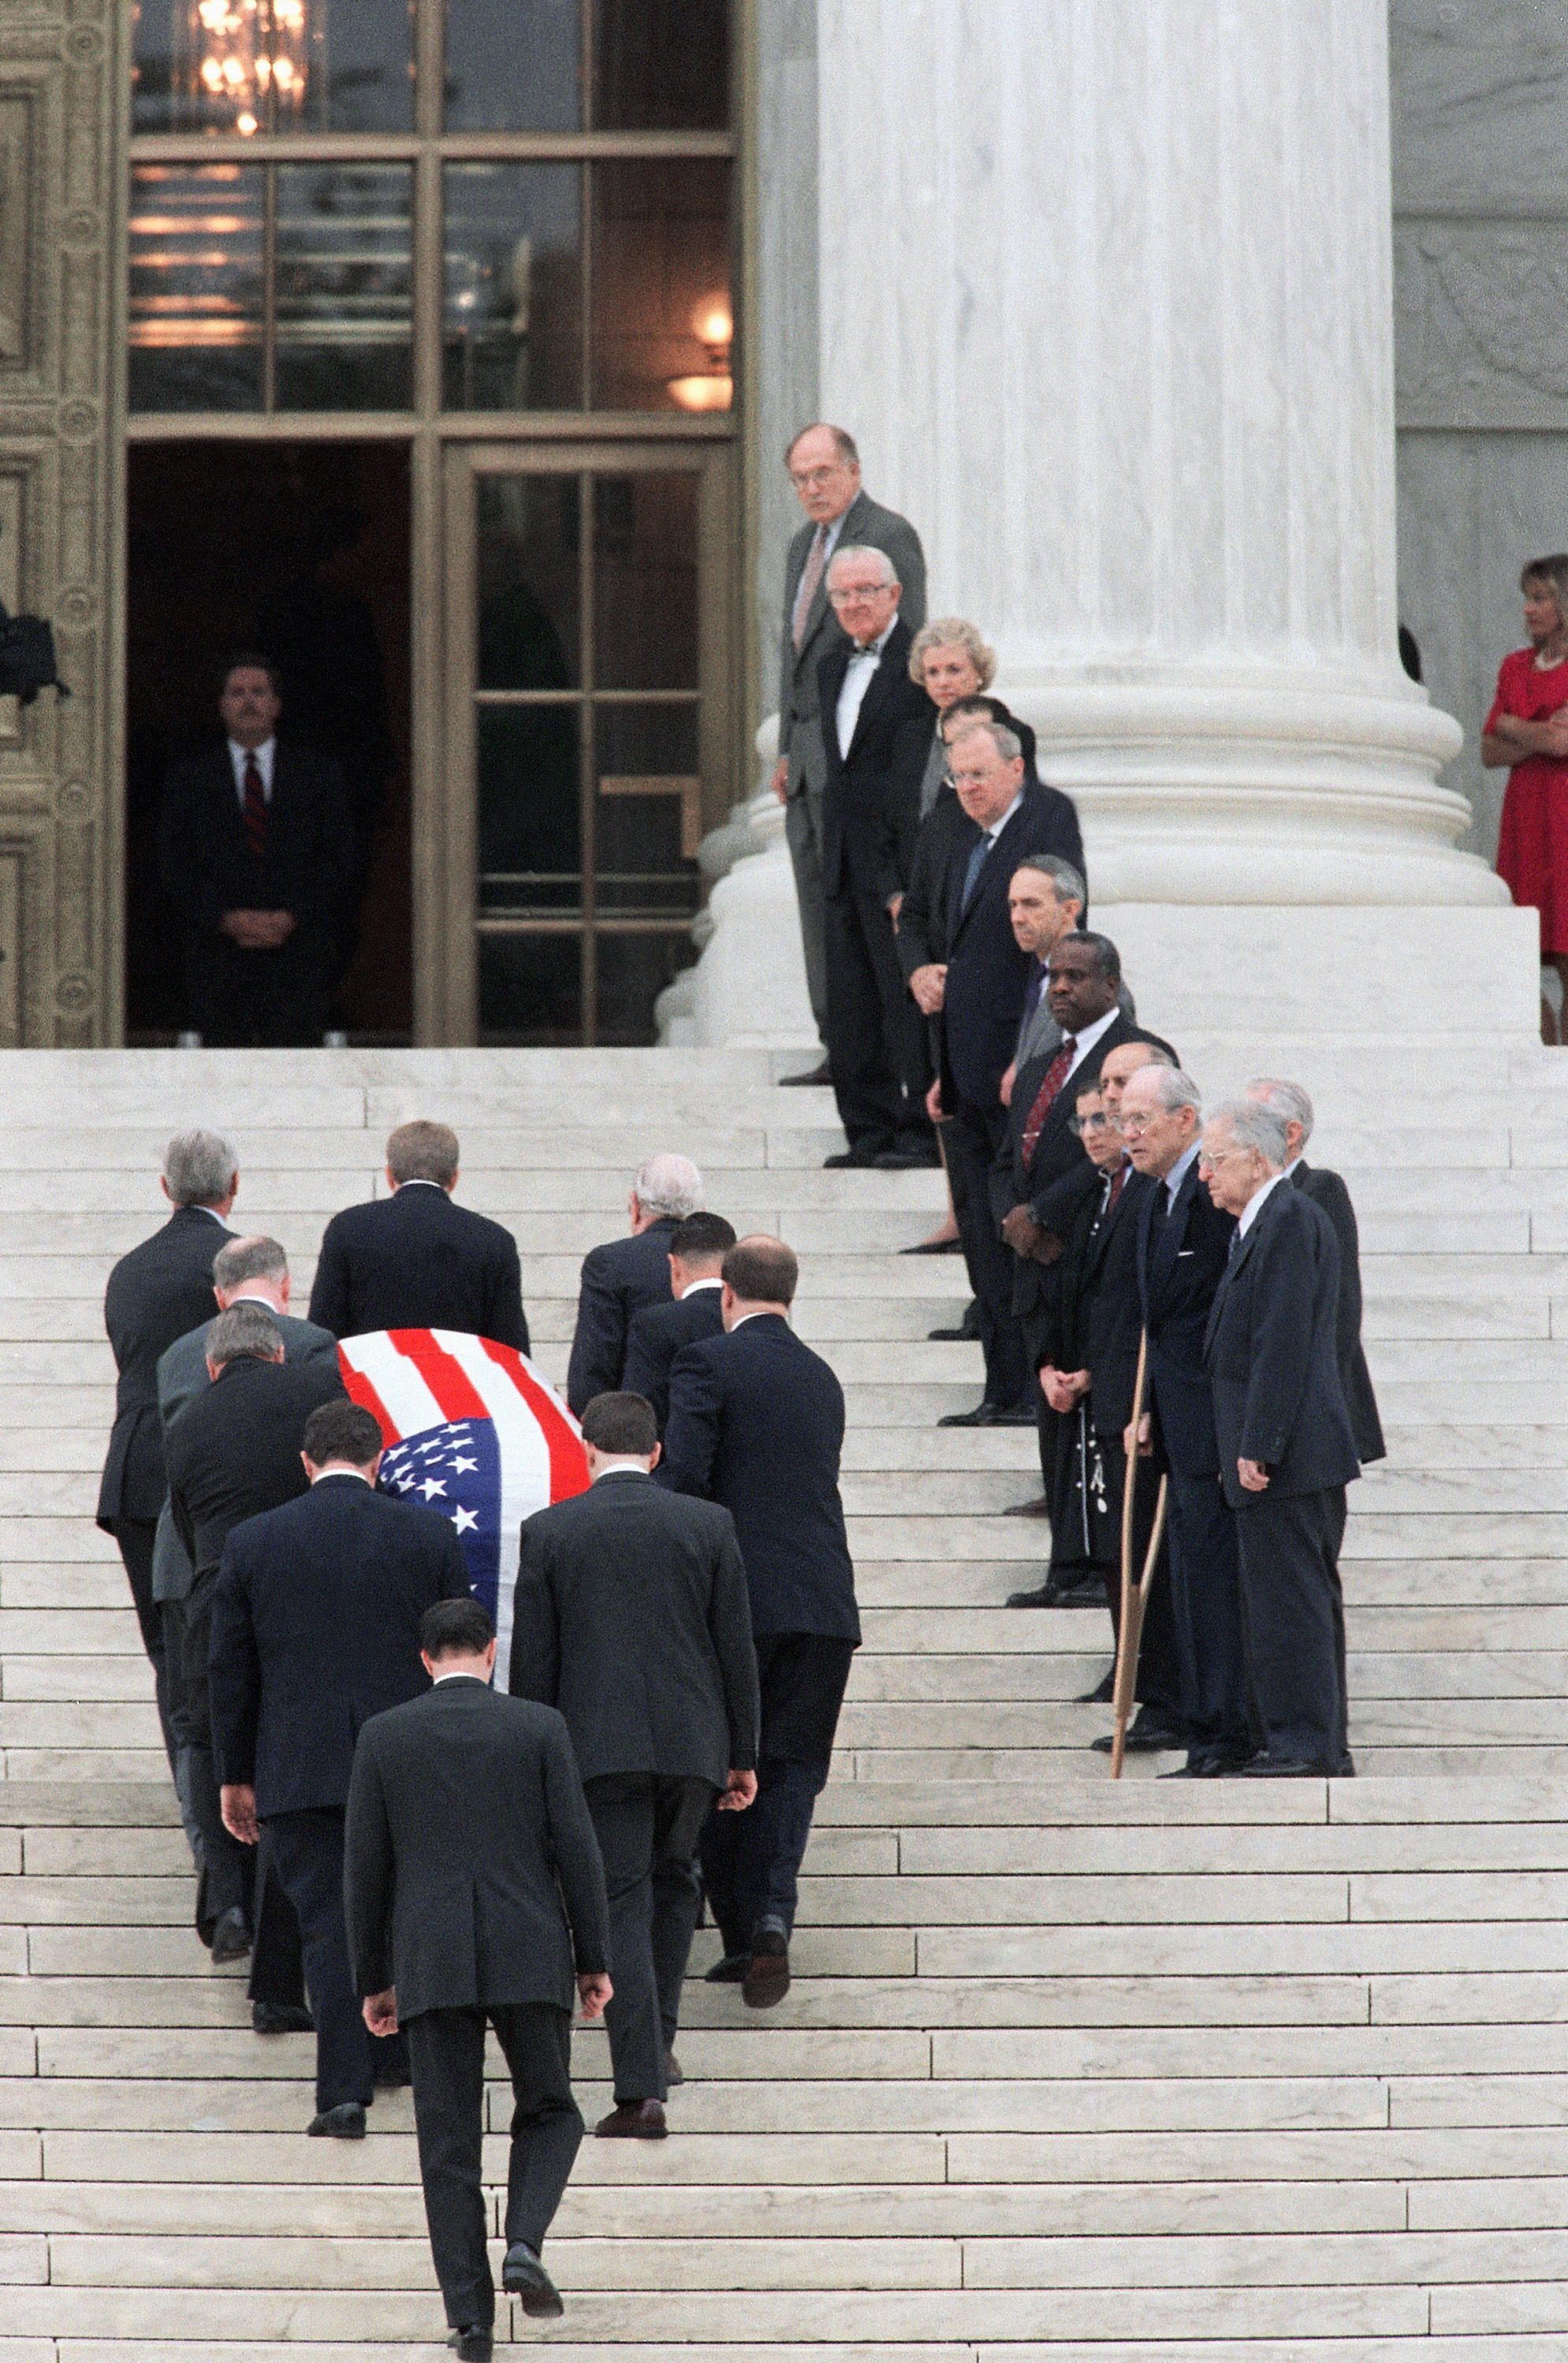 In Photos: A Short History Of Official Funerals For Supreme Court